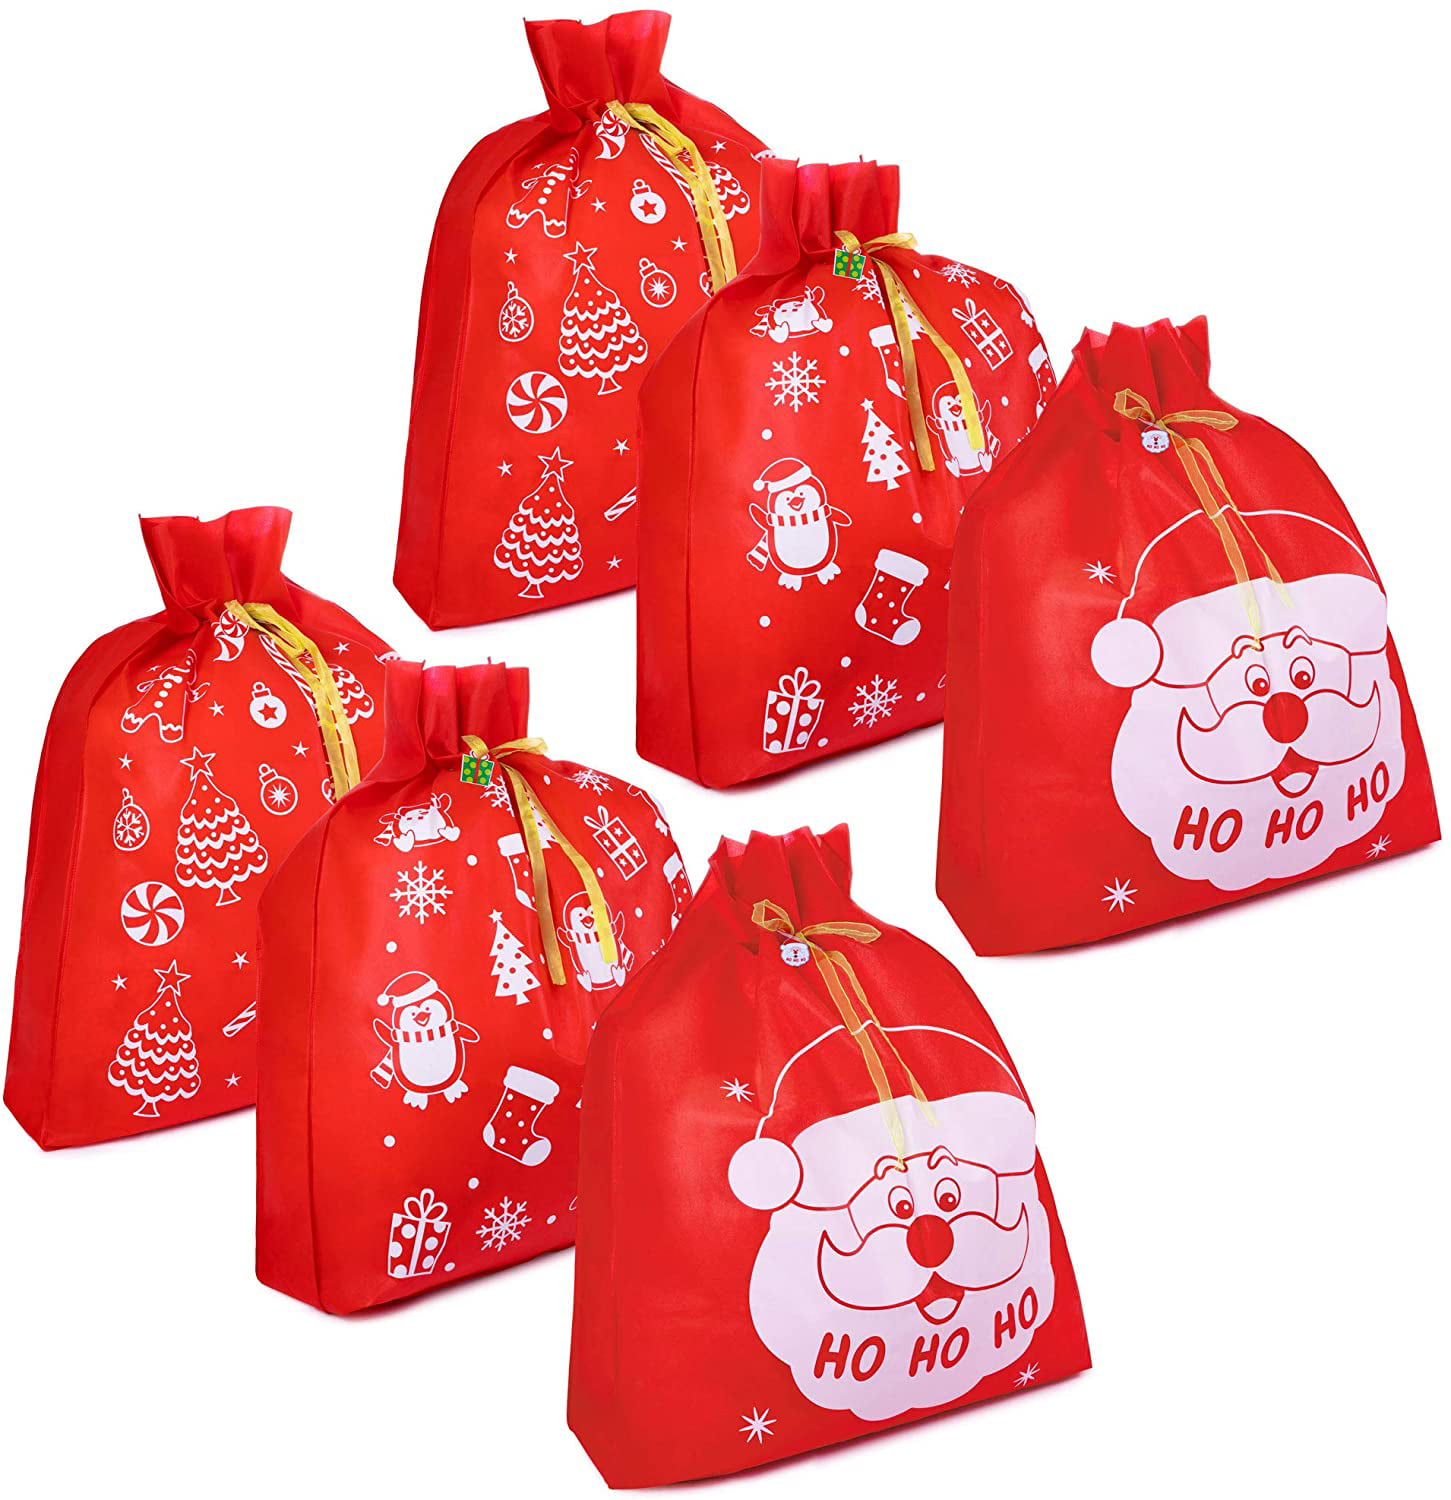 TOYS gift-wrap with gift tag 